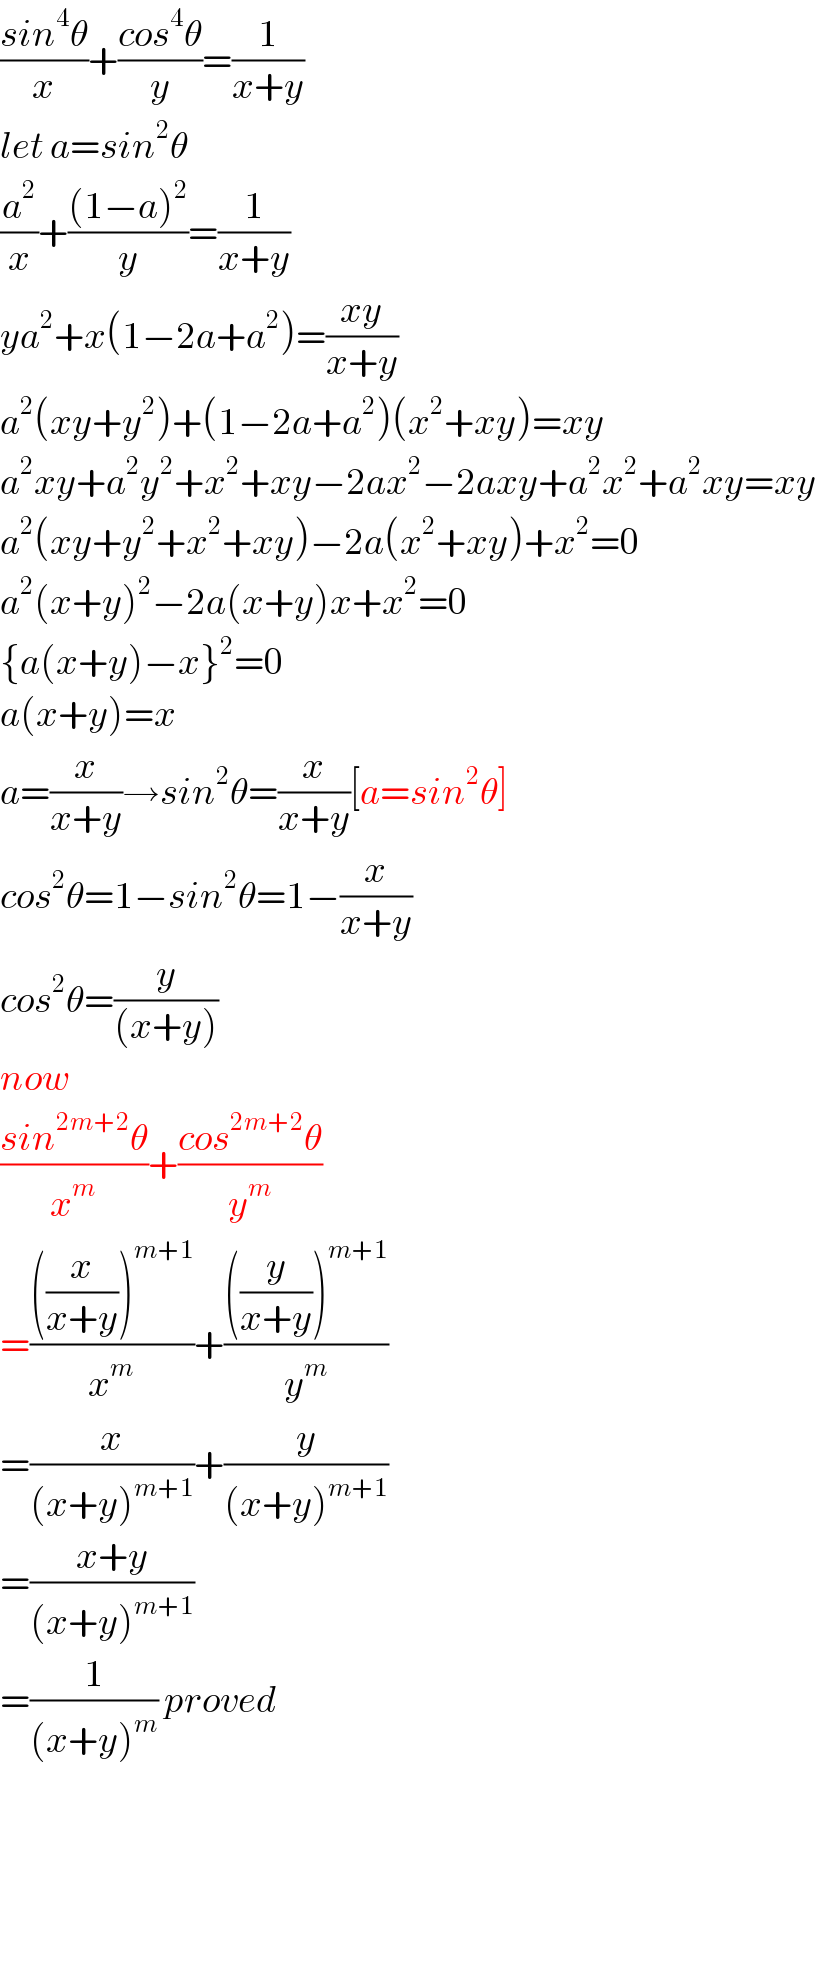 ((sin^4 θ)/x)+((cos^4 θ)/y)=(1/(x+y))  let a=sin^2 θ  (a^2 /x)+(((1−a)^2 )/y)=(1/(x+y))  ya^2 +x(1−2a+a^2 )=((xy)/(x+y))  a^2 (xy+y^2 )+(1−2a+a^2 )(x^2 +xy)=xy  a^2 xy+a^2 y^2 +x^2 +xy−2ax^2 −2axy+a^2 x^2 +a^2 xy=xy  a^2 (xy+y^2 +x^2 +xy)−2a(x^2 +xy)+x^2 =0  a^2 (x+y)^2 −2a(x+y)x+x^2 =0  {a(x+y)−x}^2 =0  a(x+y)=x  a=(x/(x+y))→sin^2 θ=(x/(x+y))[a=sin^2 θ]  cos^2 θ=1−sin^2 θ=1−(x/(x+y))  cos^2 θ=(y/((x+y)))  now  ((sin^(2m+2) θ)/x^m )+((cos^(2m+2) θ)/y^m )  =((((x/(x+y)))^(m+1) )/x^m )+((((y/(x+y)))^(m+1) )/y^m )  =(x/((x+y)^(m+1) ))+(y/((x+y)^(m+1) ))  =((x+y)/((x+y)^(m+1) ))  =(1/((x+y)^m )) proved        